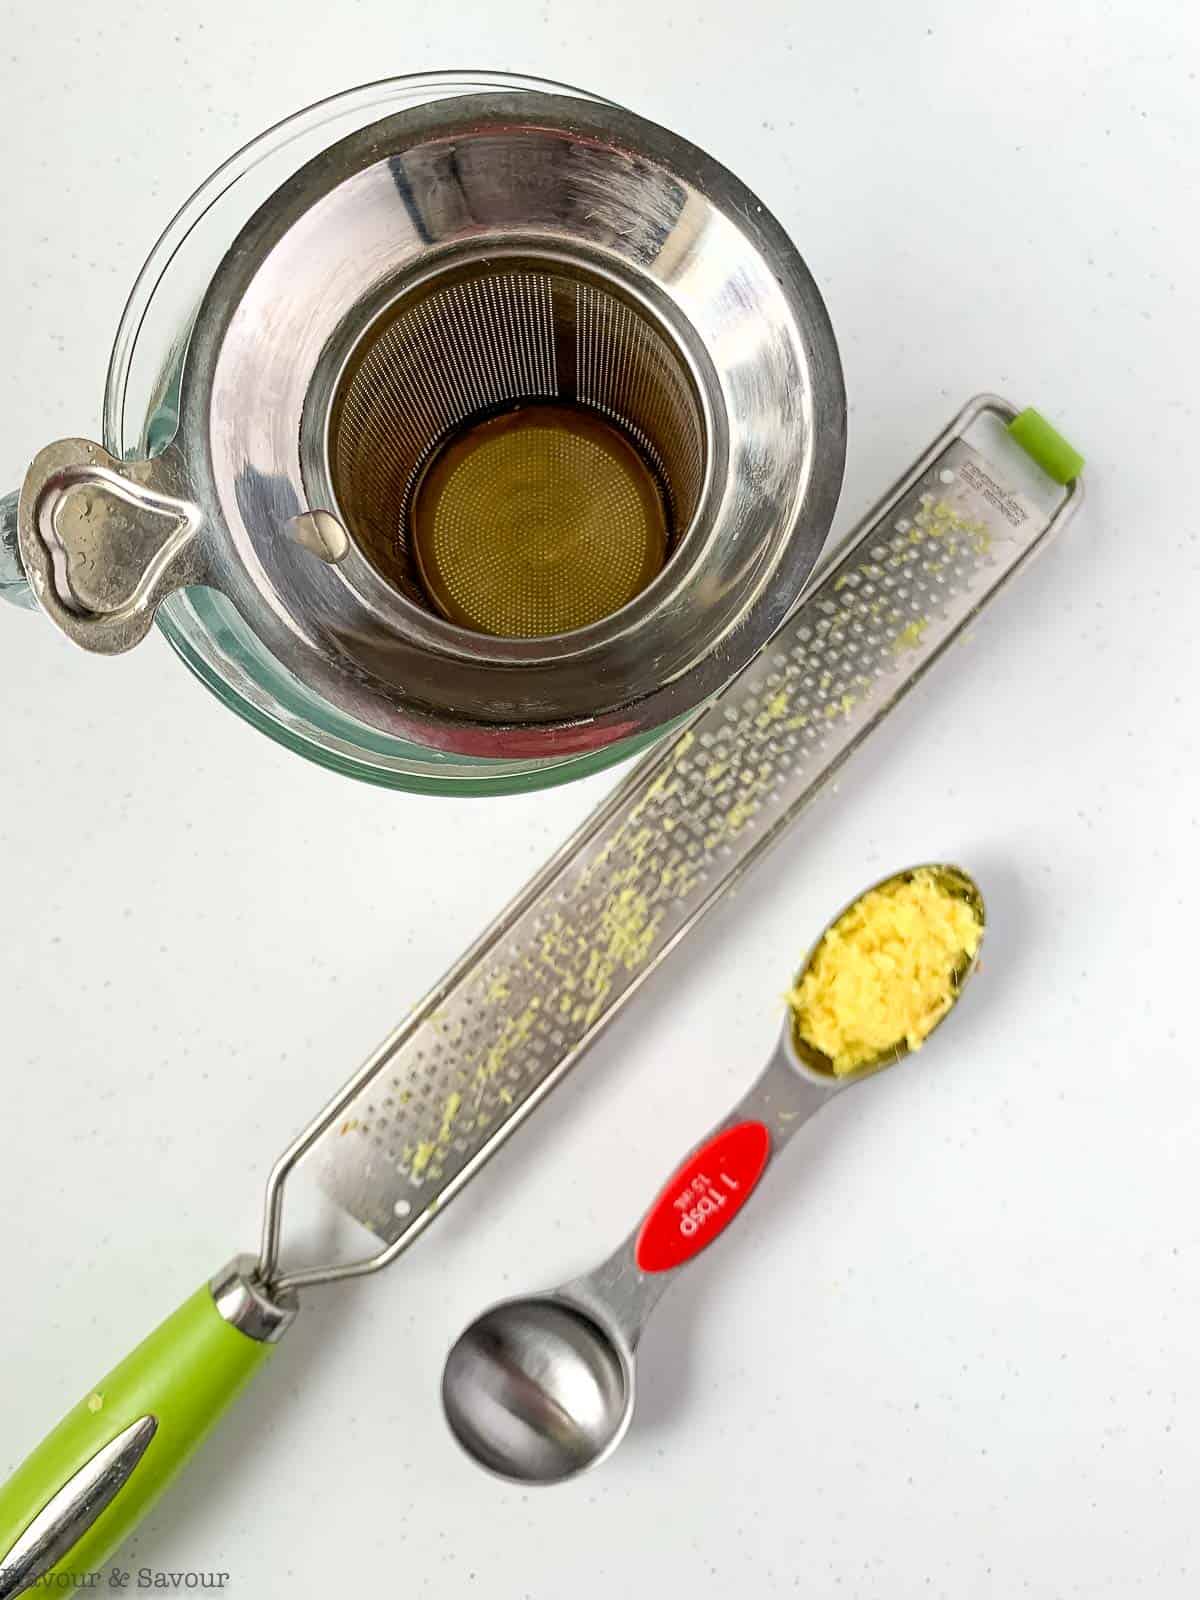 A microplane and a teaspoon with grated ginger.